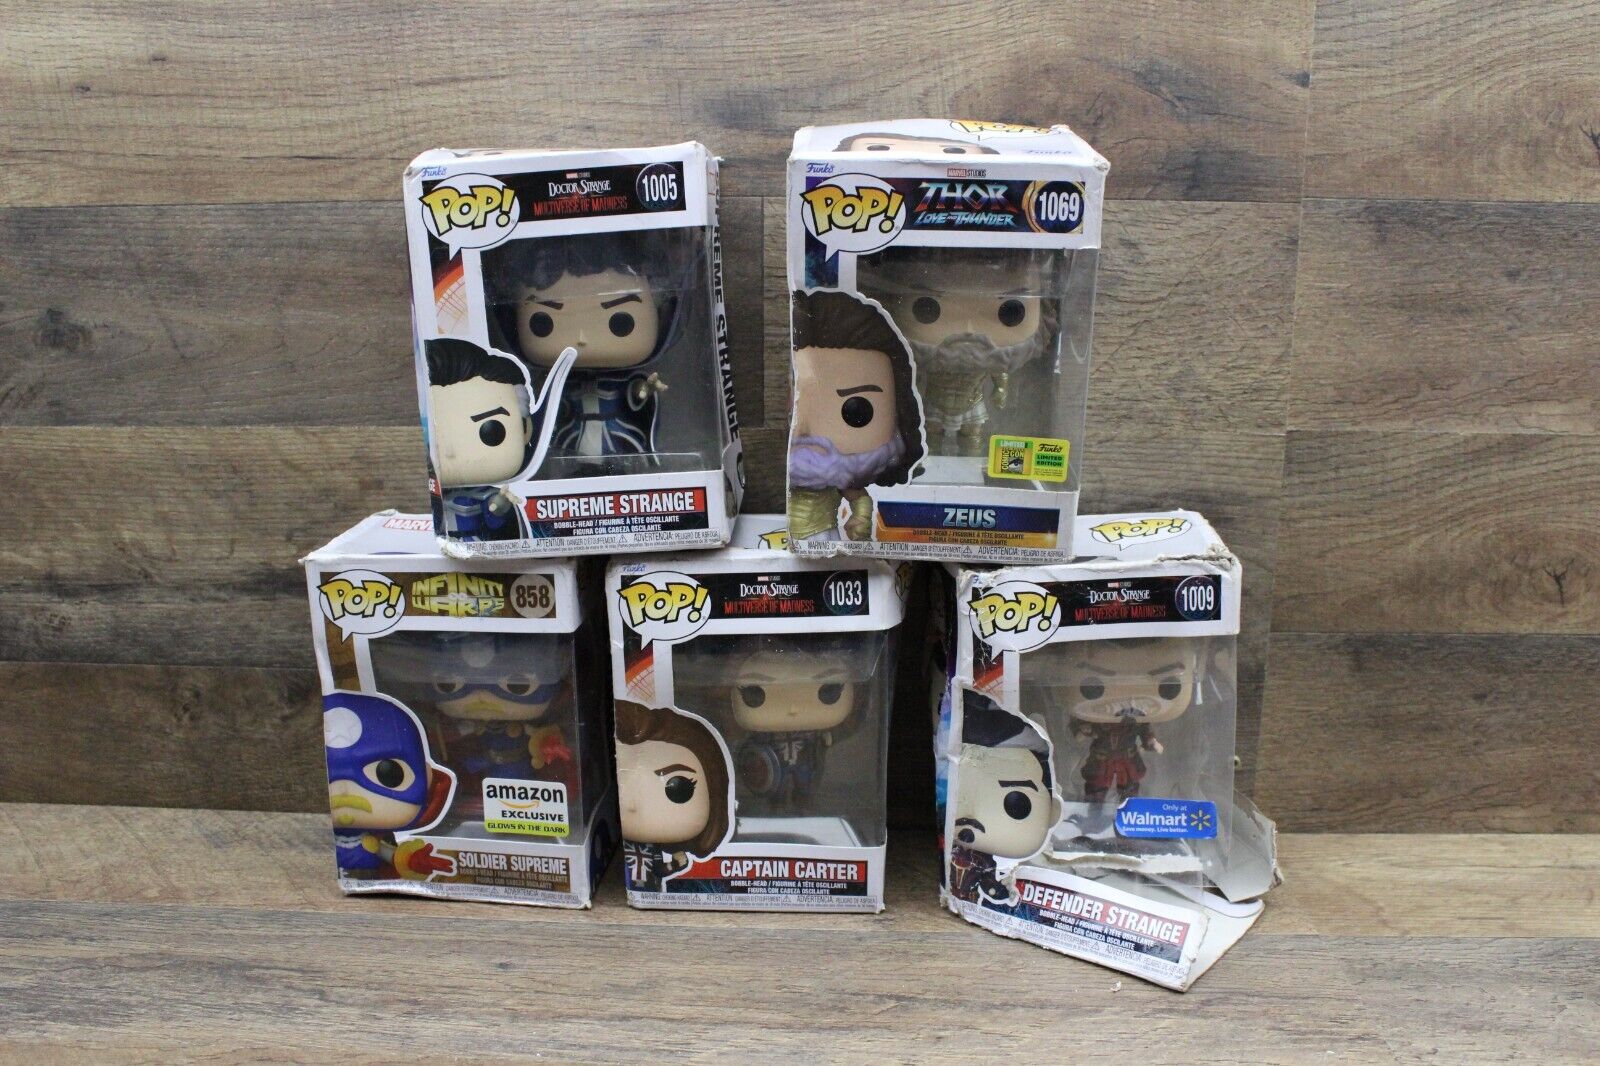 Lot of 5 Funko Pops with Damaged Boxes 1005 858 1069 1009 1033 Marvel